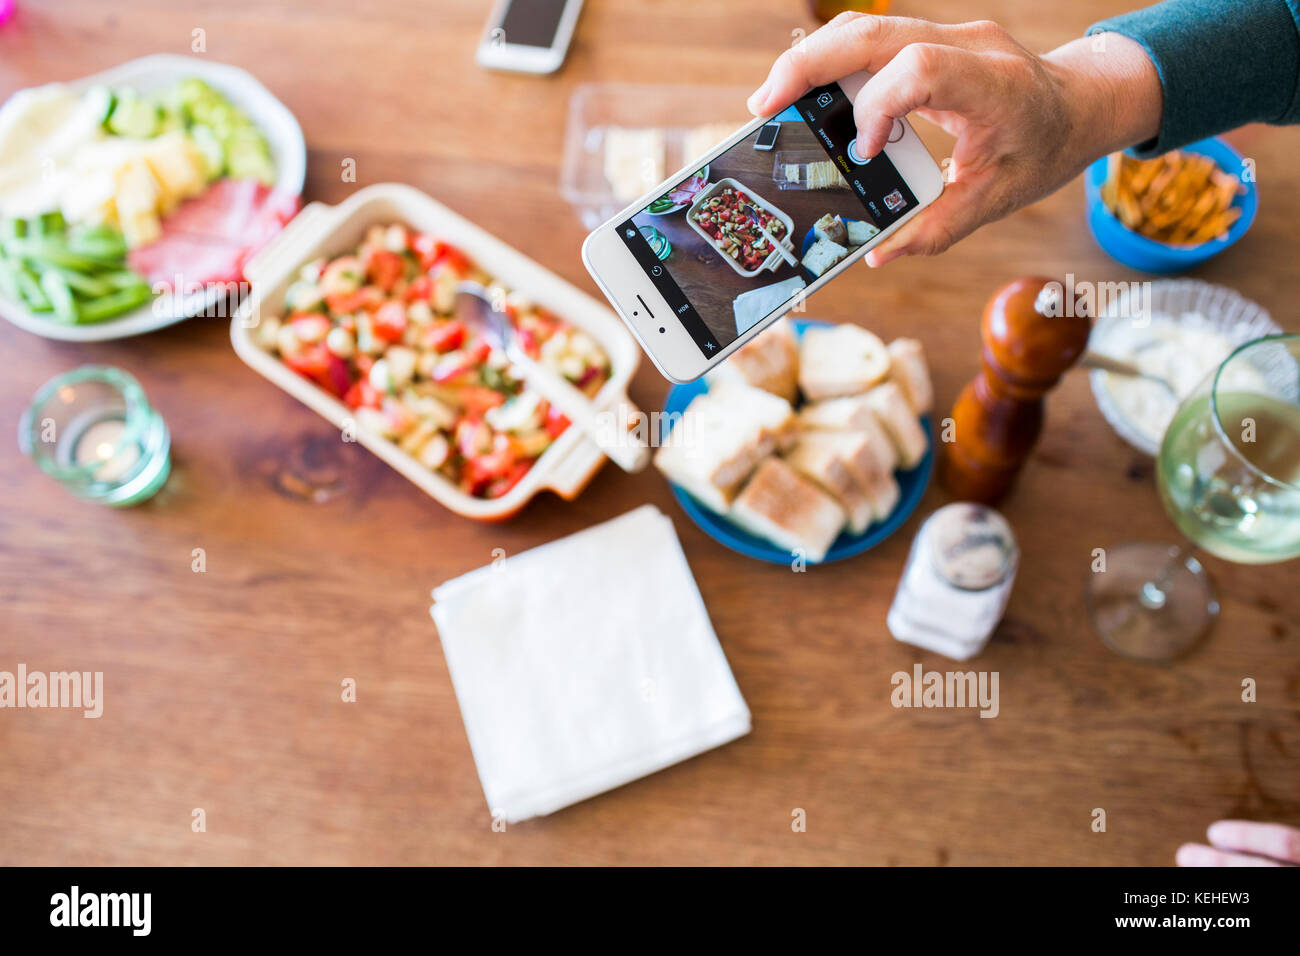 Woman photographing appetizers on table with cell phone Stock Photo